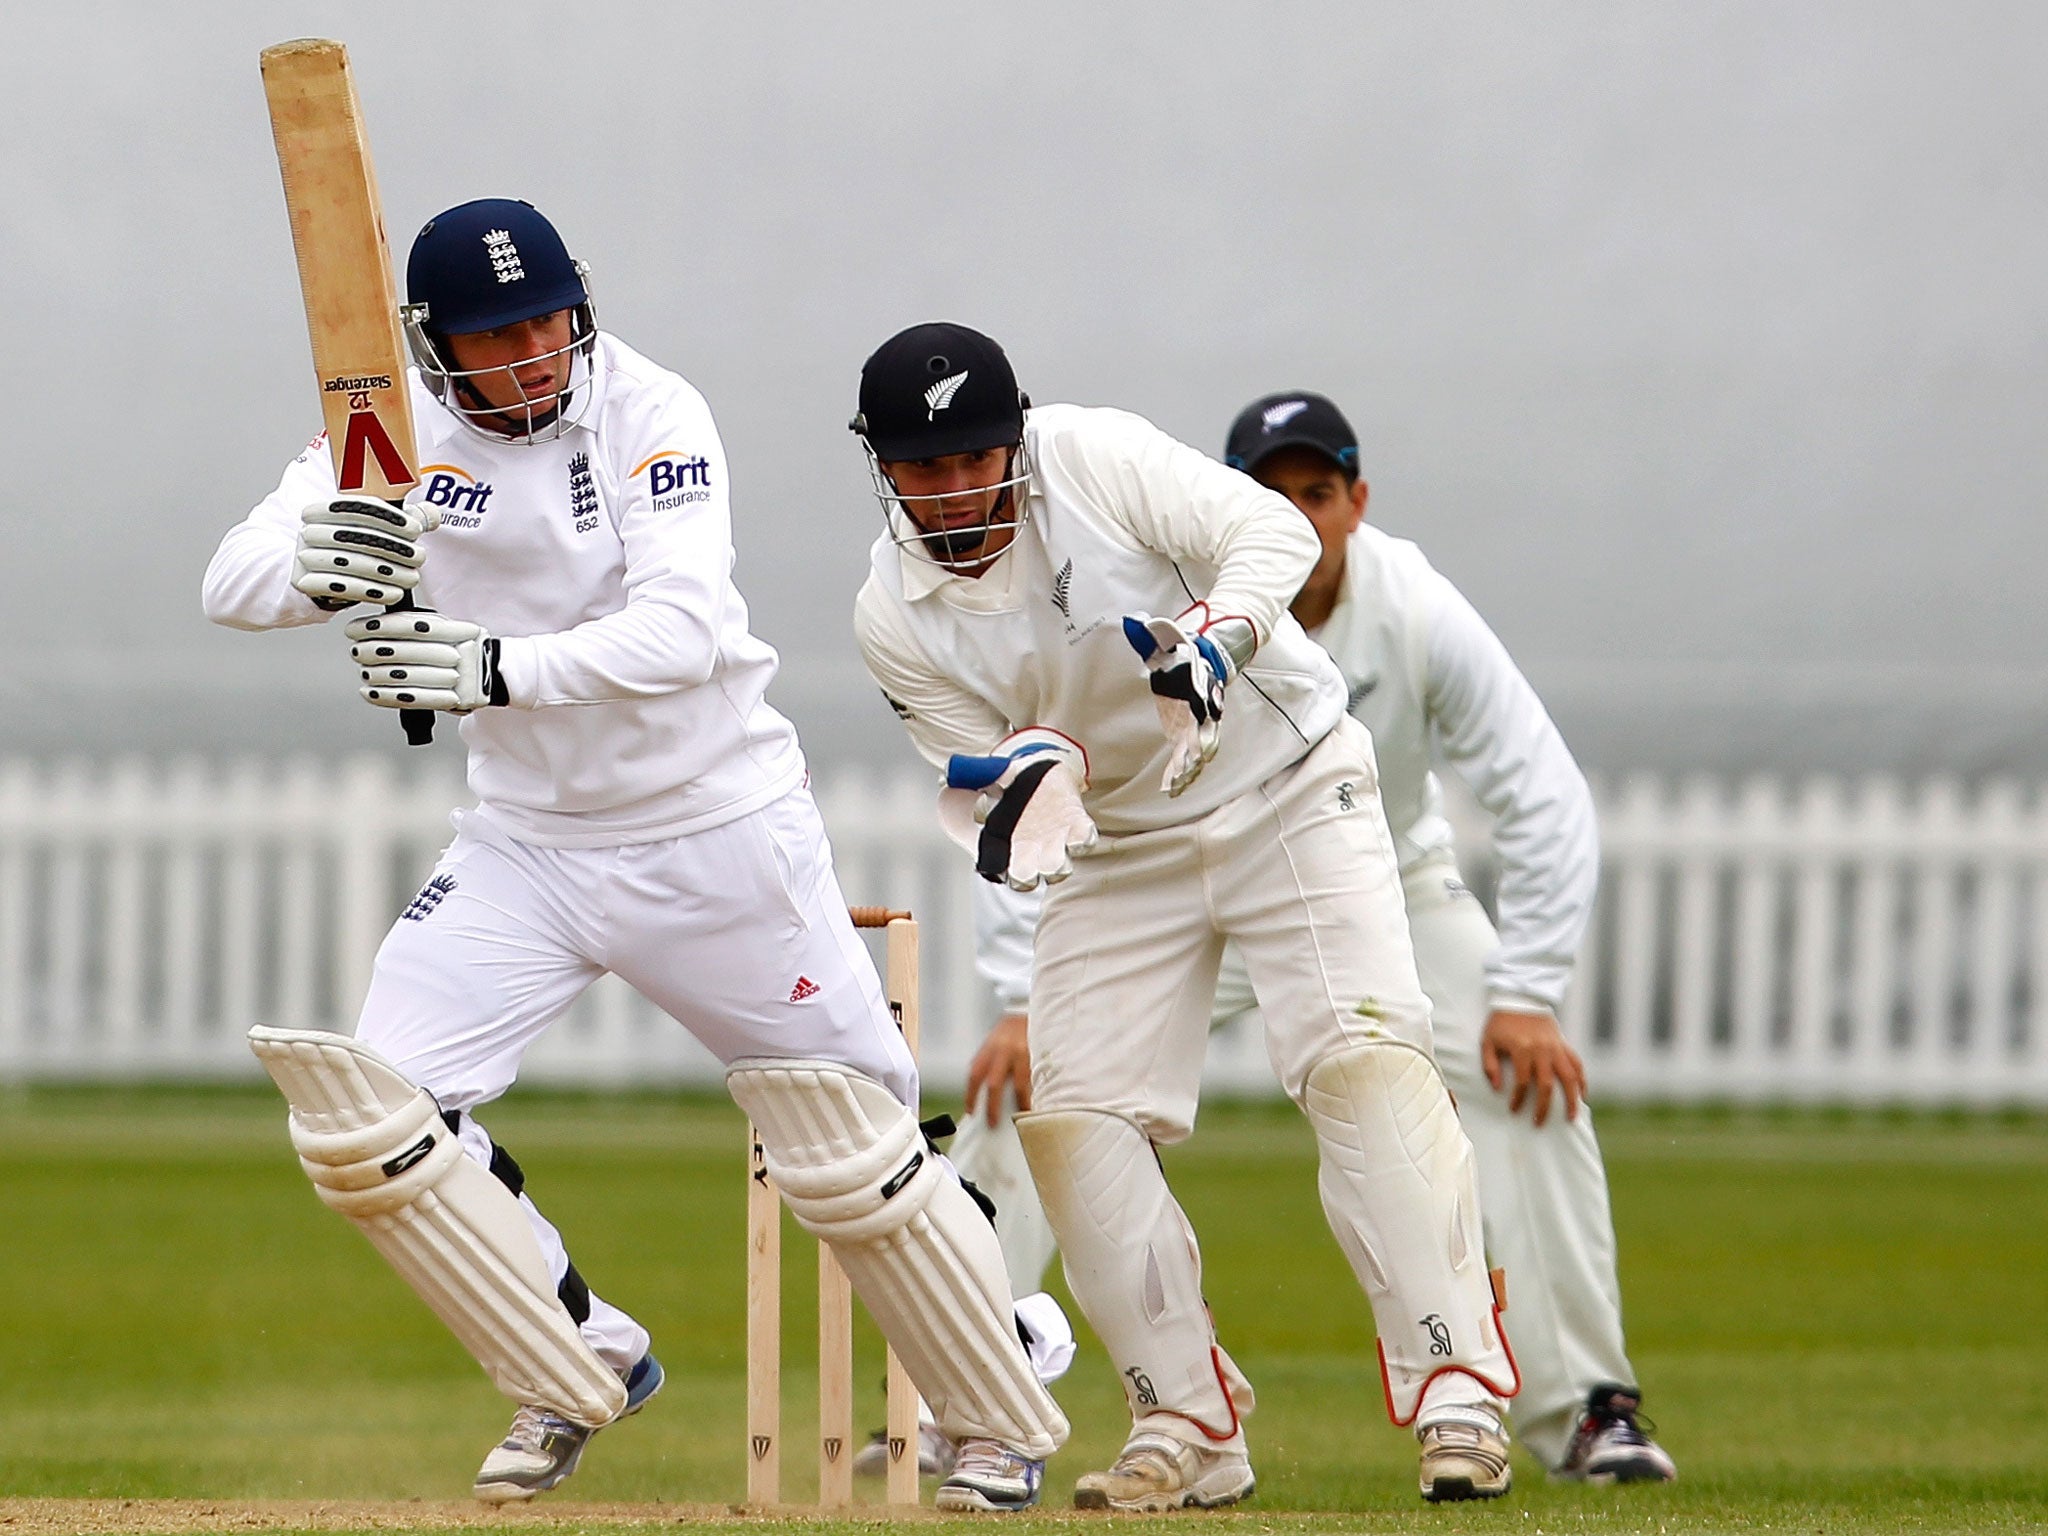 Touch of class: Jonny Bairstow on his way to an unbeaten 45 for England Lions against New Zealand